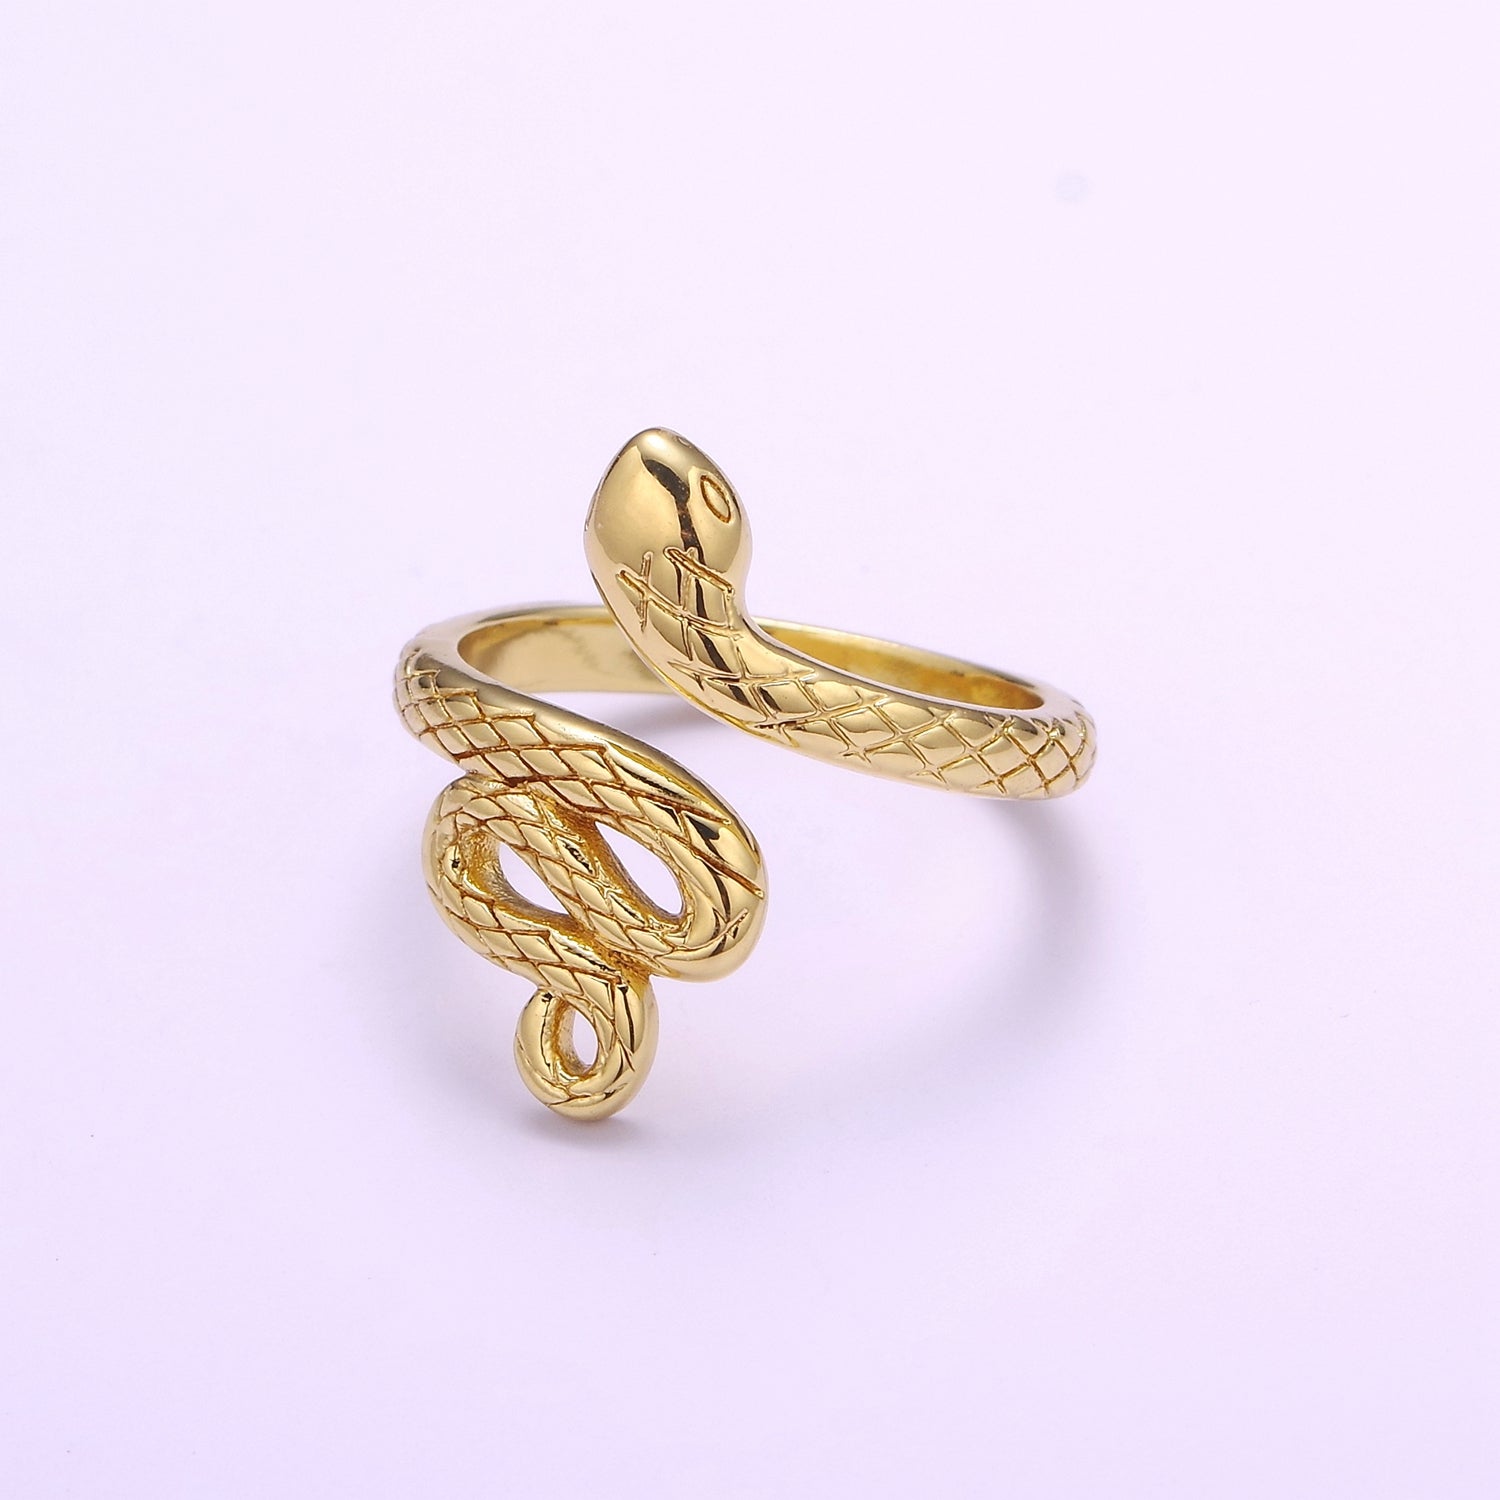 3D Gold snake ring, serpent ring, Statement ring, Gold Open Snake Ring, Twist ring, Stackable ring, Animal ring US Size 5 O321 - DLUXCA